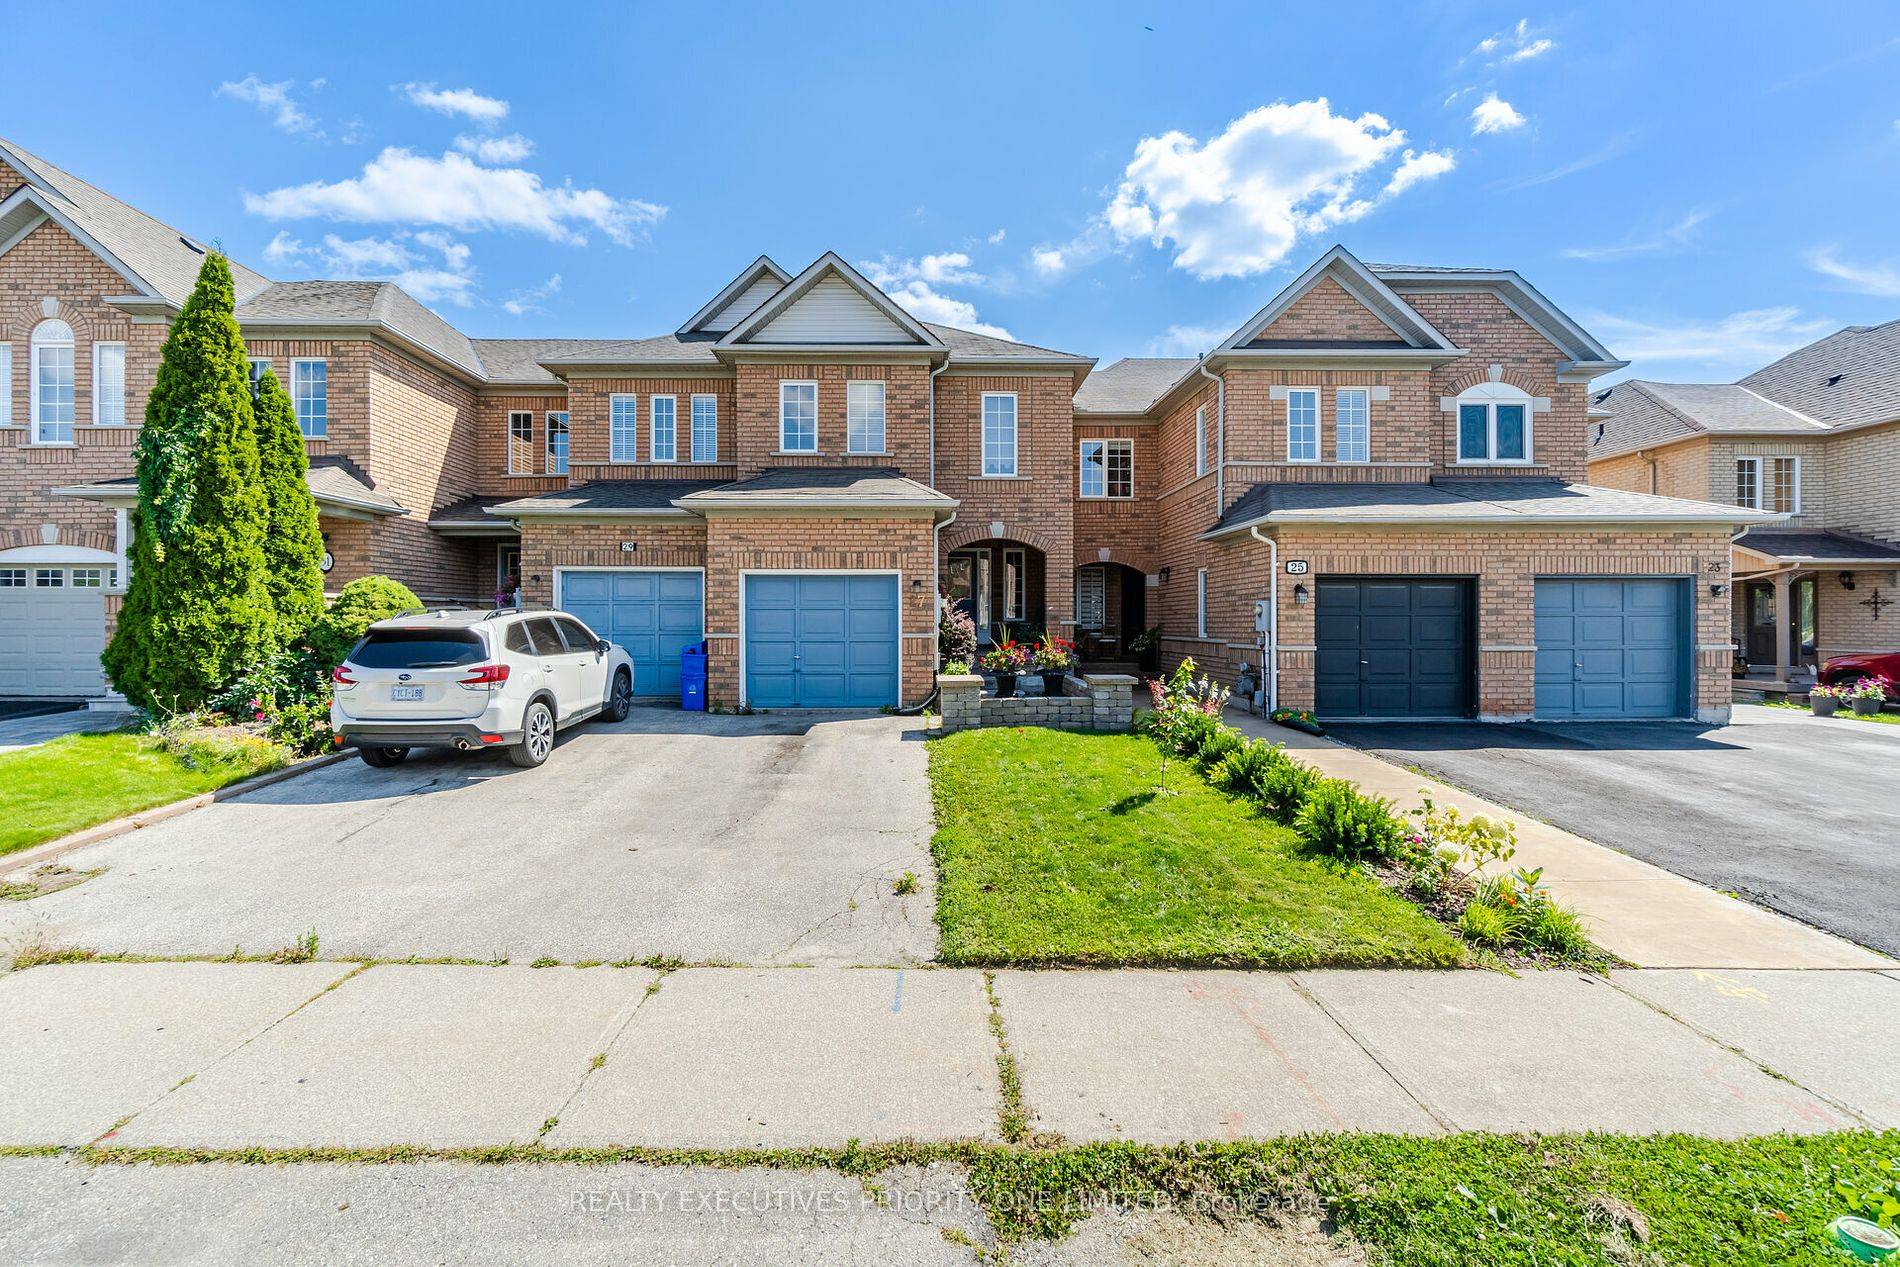 5 Reasons Why You Will Love This Townhouse 1 A Spacious and elegant 2 Storey Townhouse Located In The Desirable Neighborhood Of Maple, Situated On A Generous Lot That Measures ...